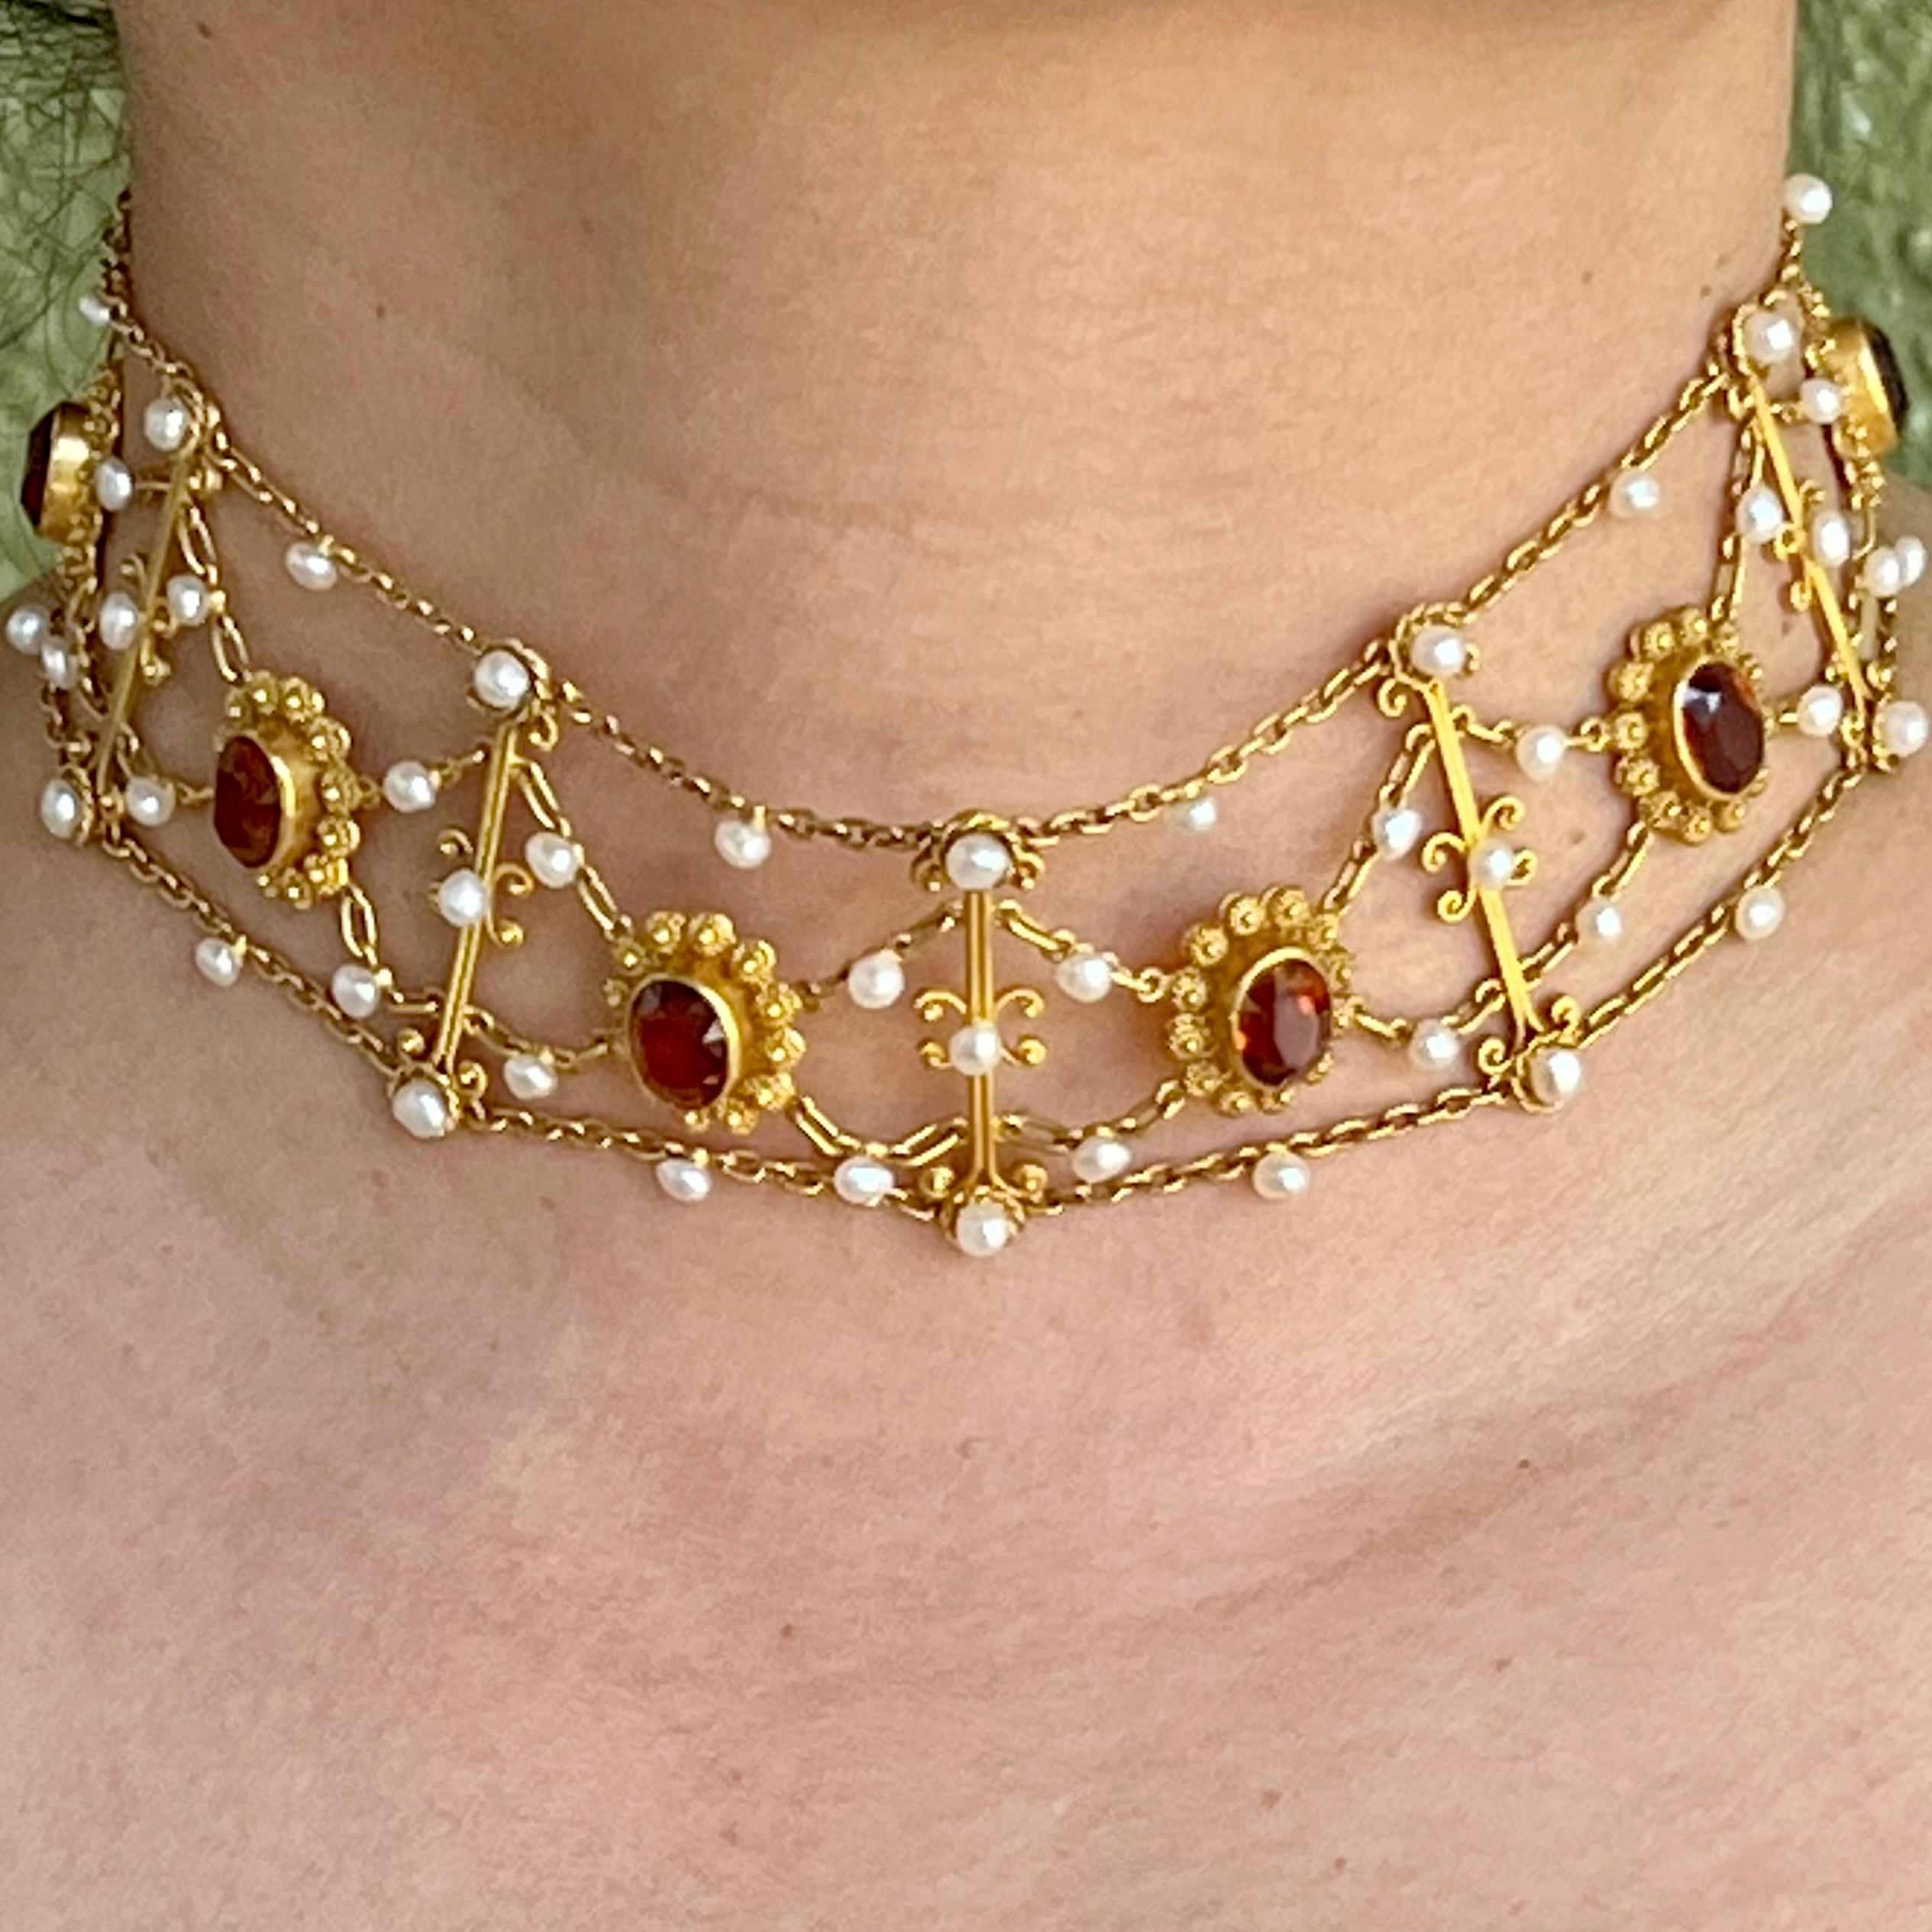 This choker is hand crafted in 18 Karat gold with deep amber faceted oval citrines suspended from a chain matrix with tiny white seed pearls that accent the granulation throughout. Each section is perfectly matched to lay beautifully on the neck as